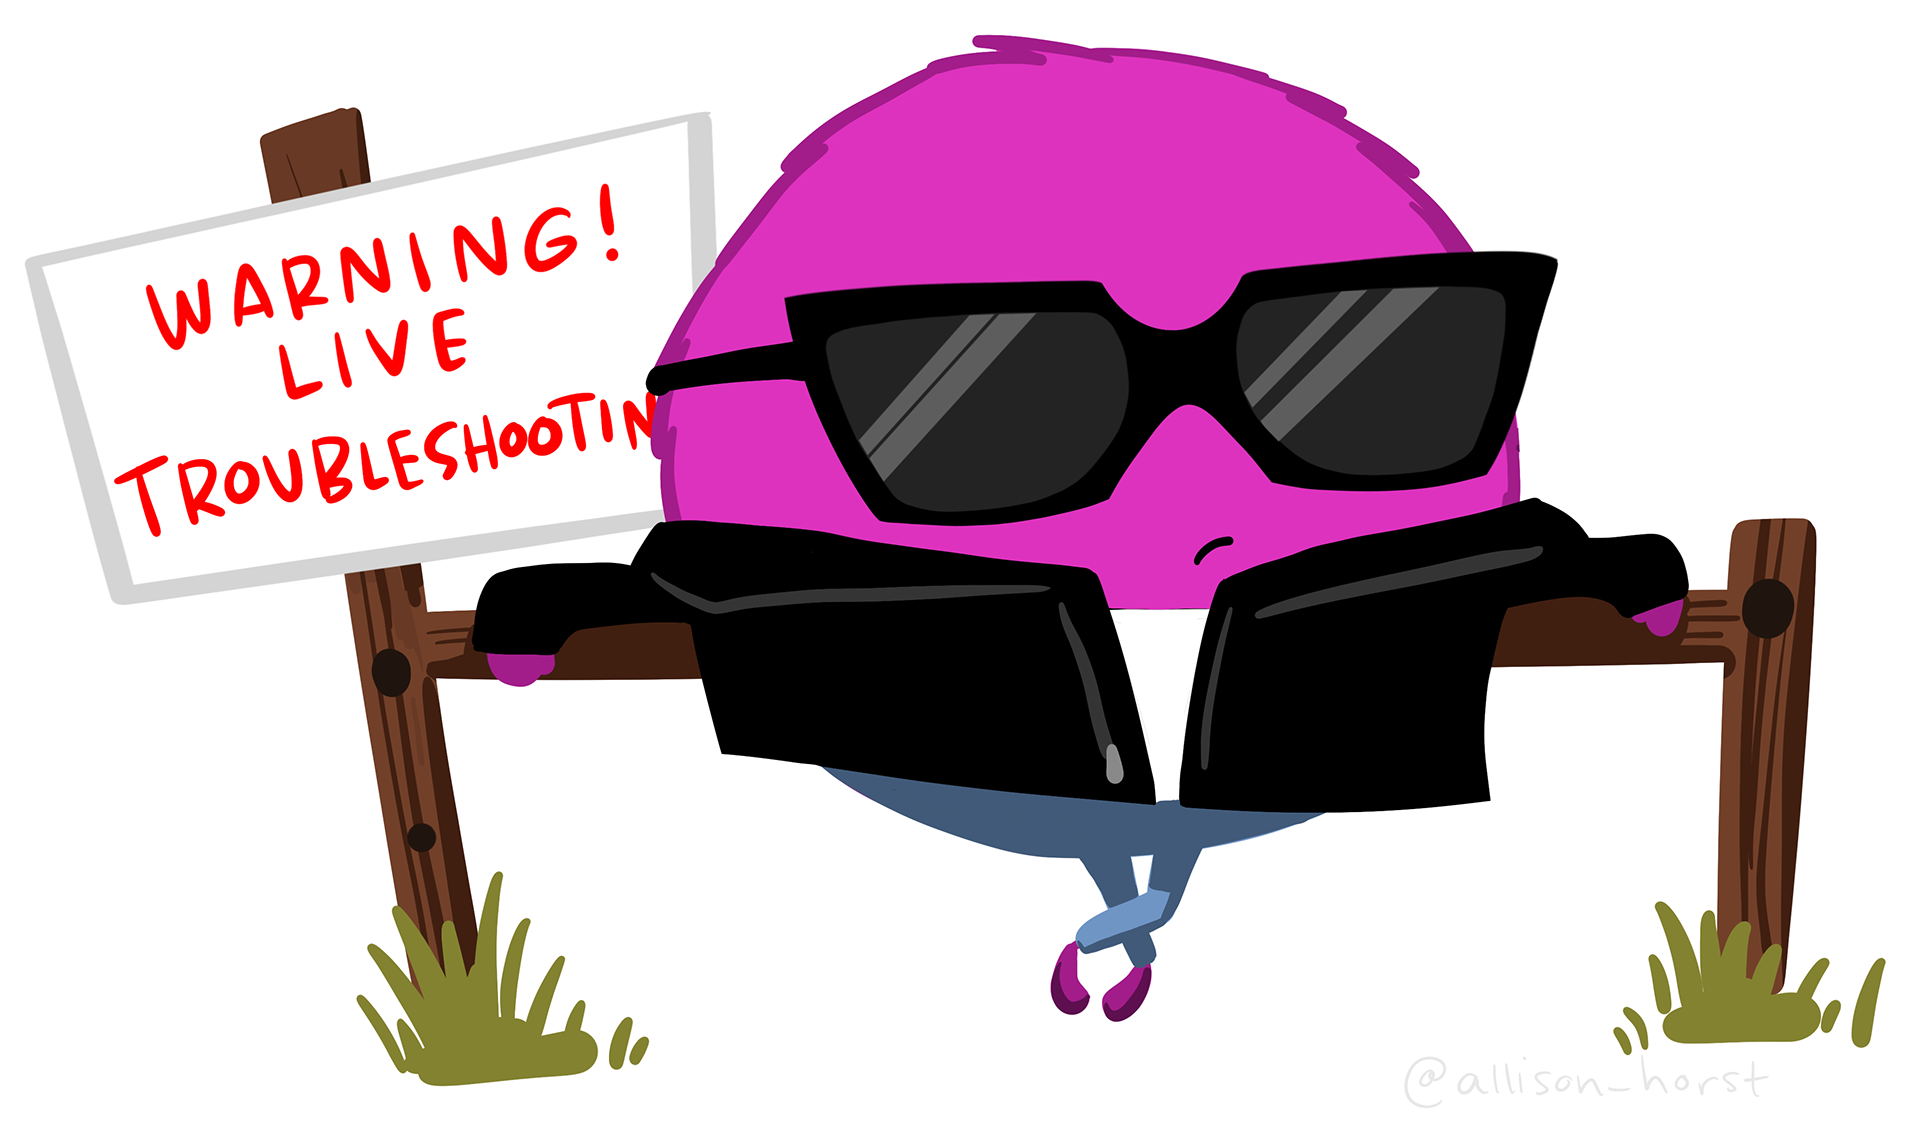 A little monster in a cool black jacket and sunglasses, leaning casually against a fence with a sign reading "Warning! Live troubleshooting!"